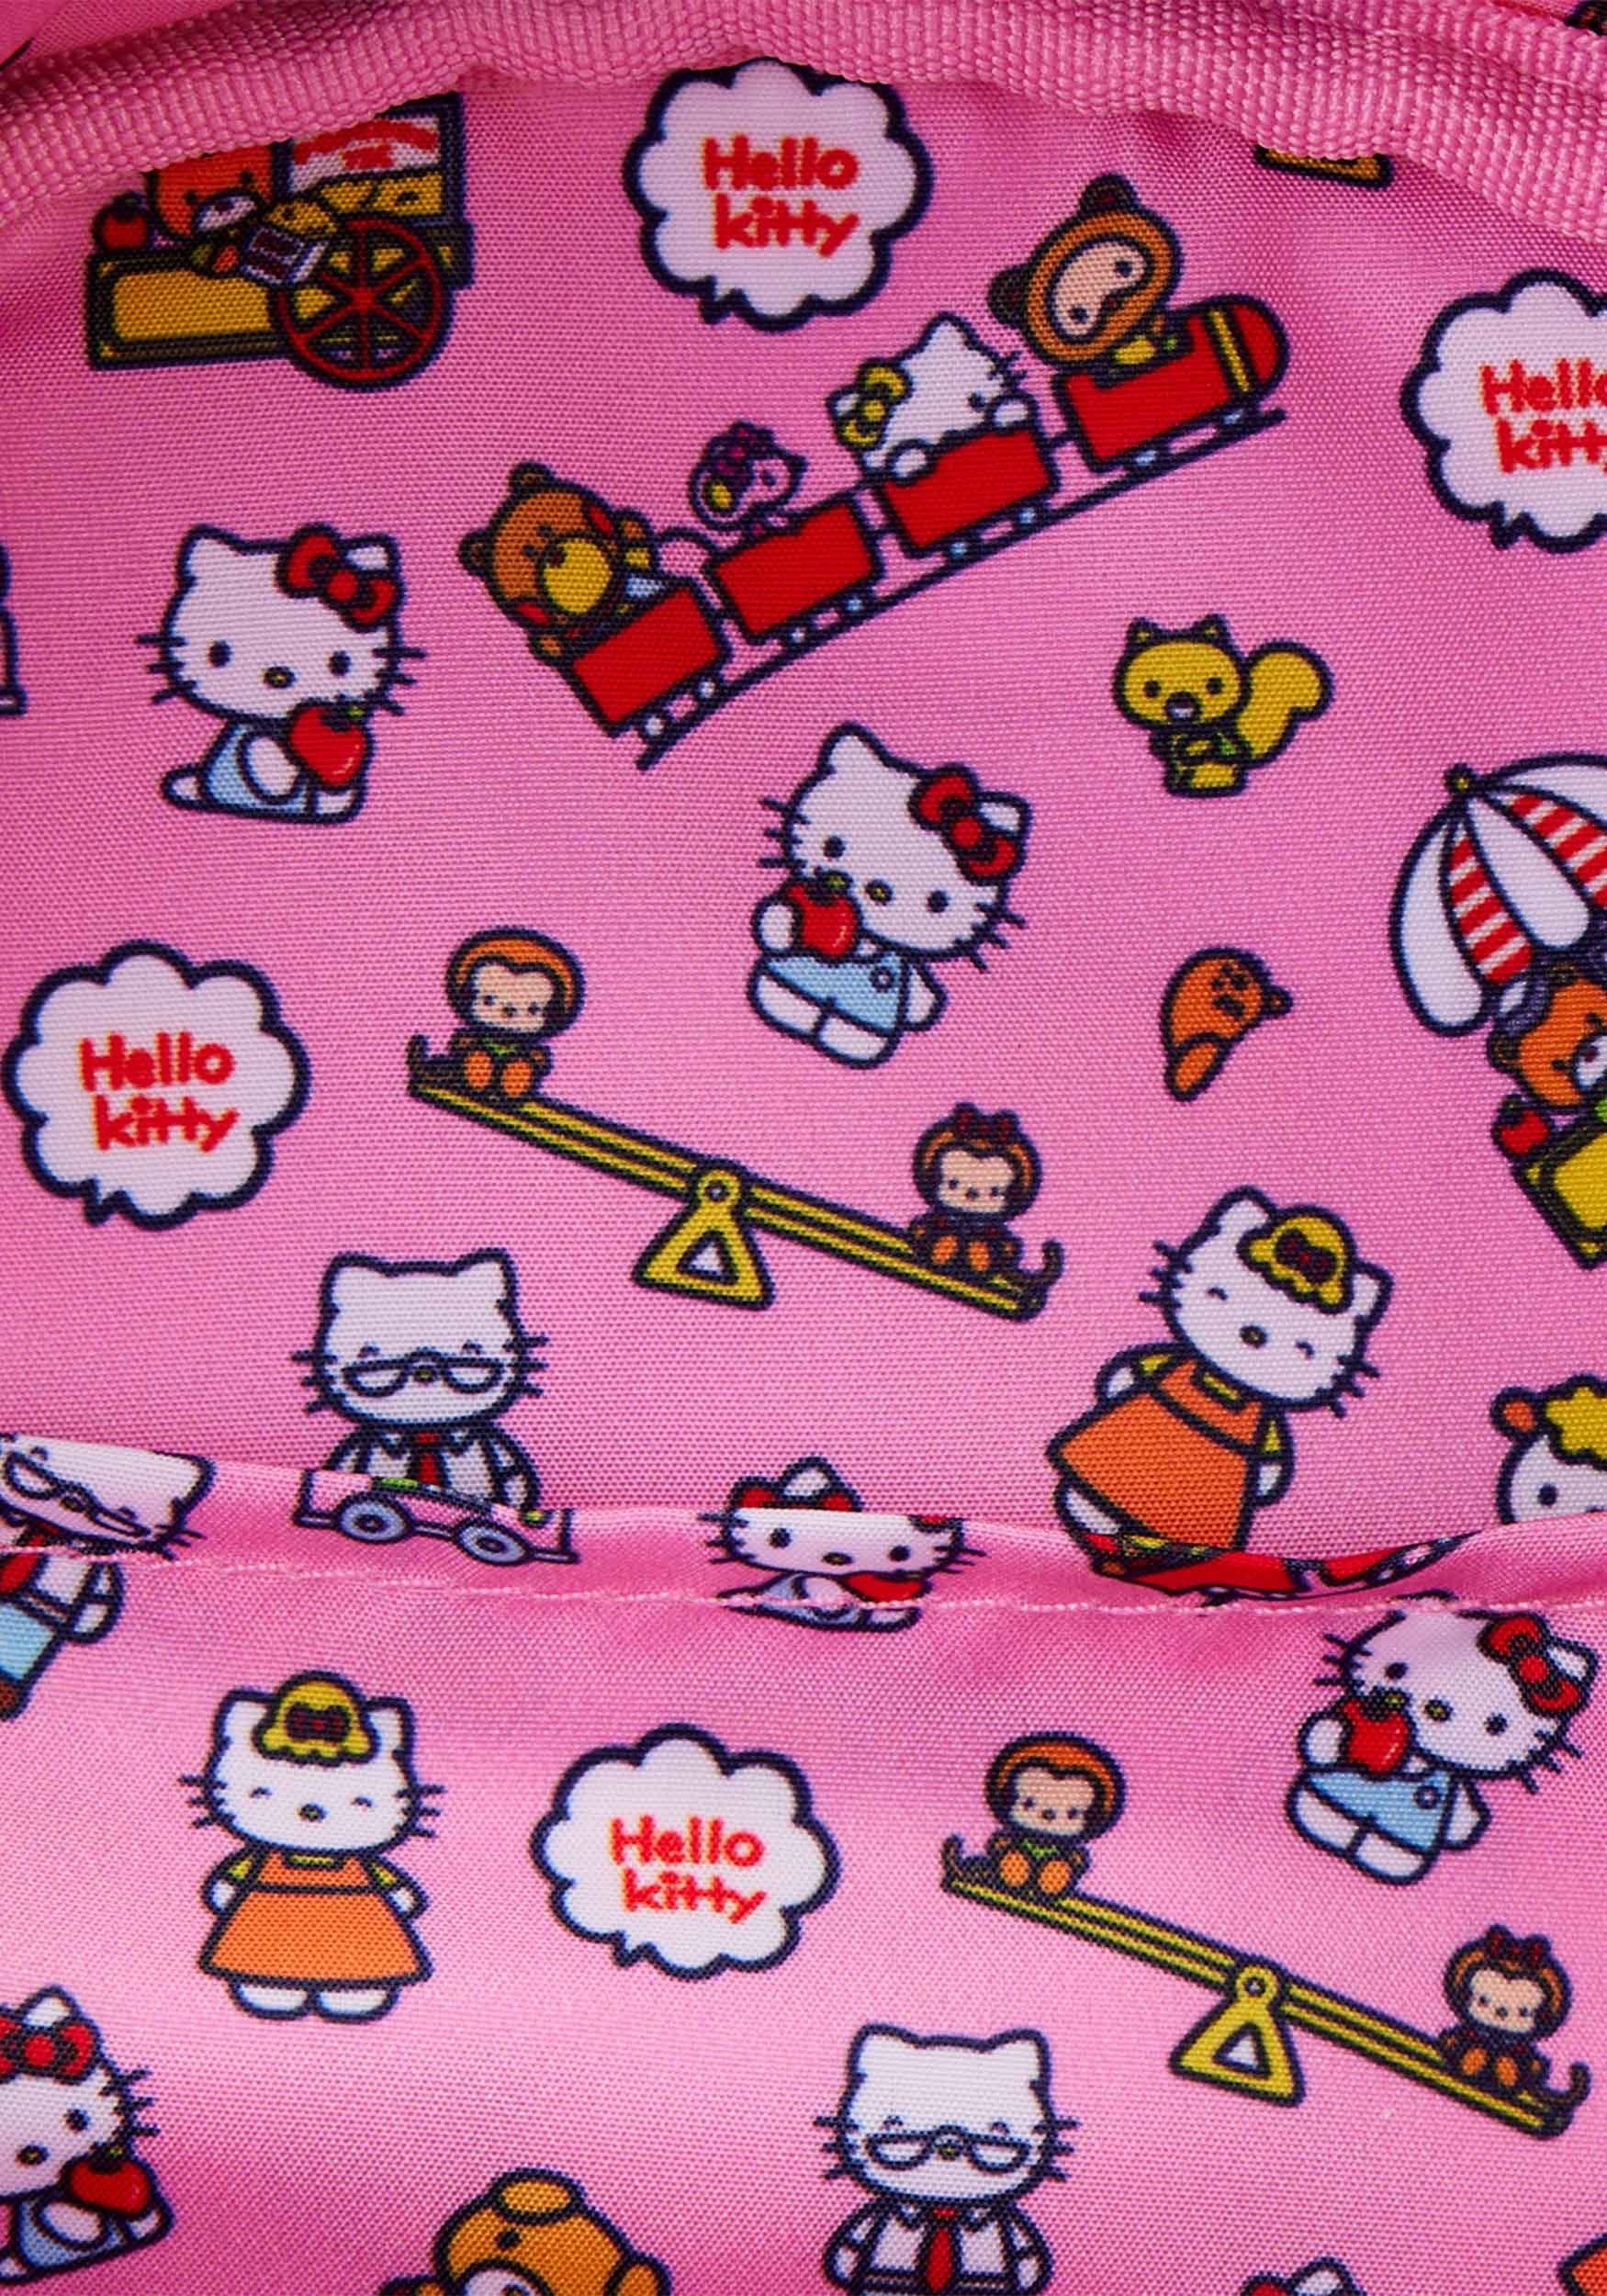 Loungefly Hello Kitty and Friends Carnival Crossbody Bag